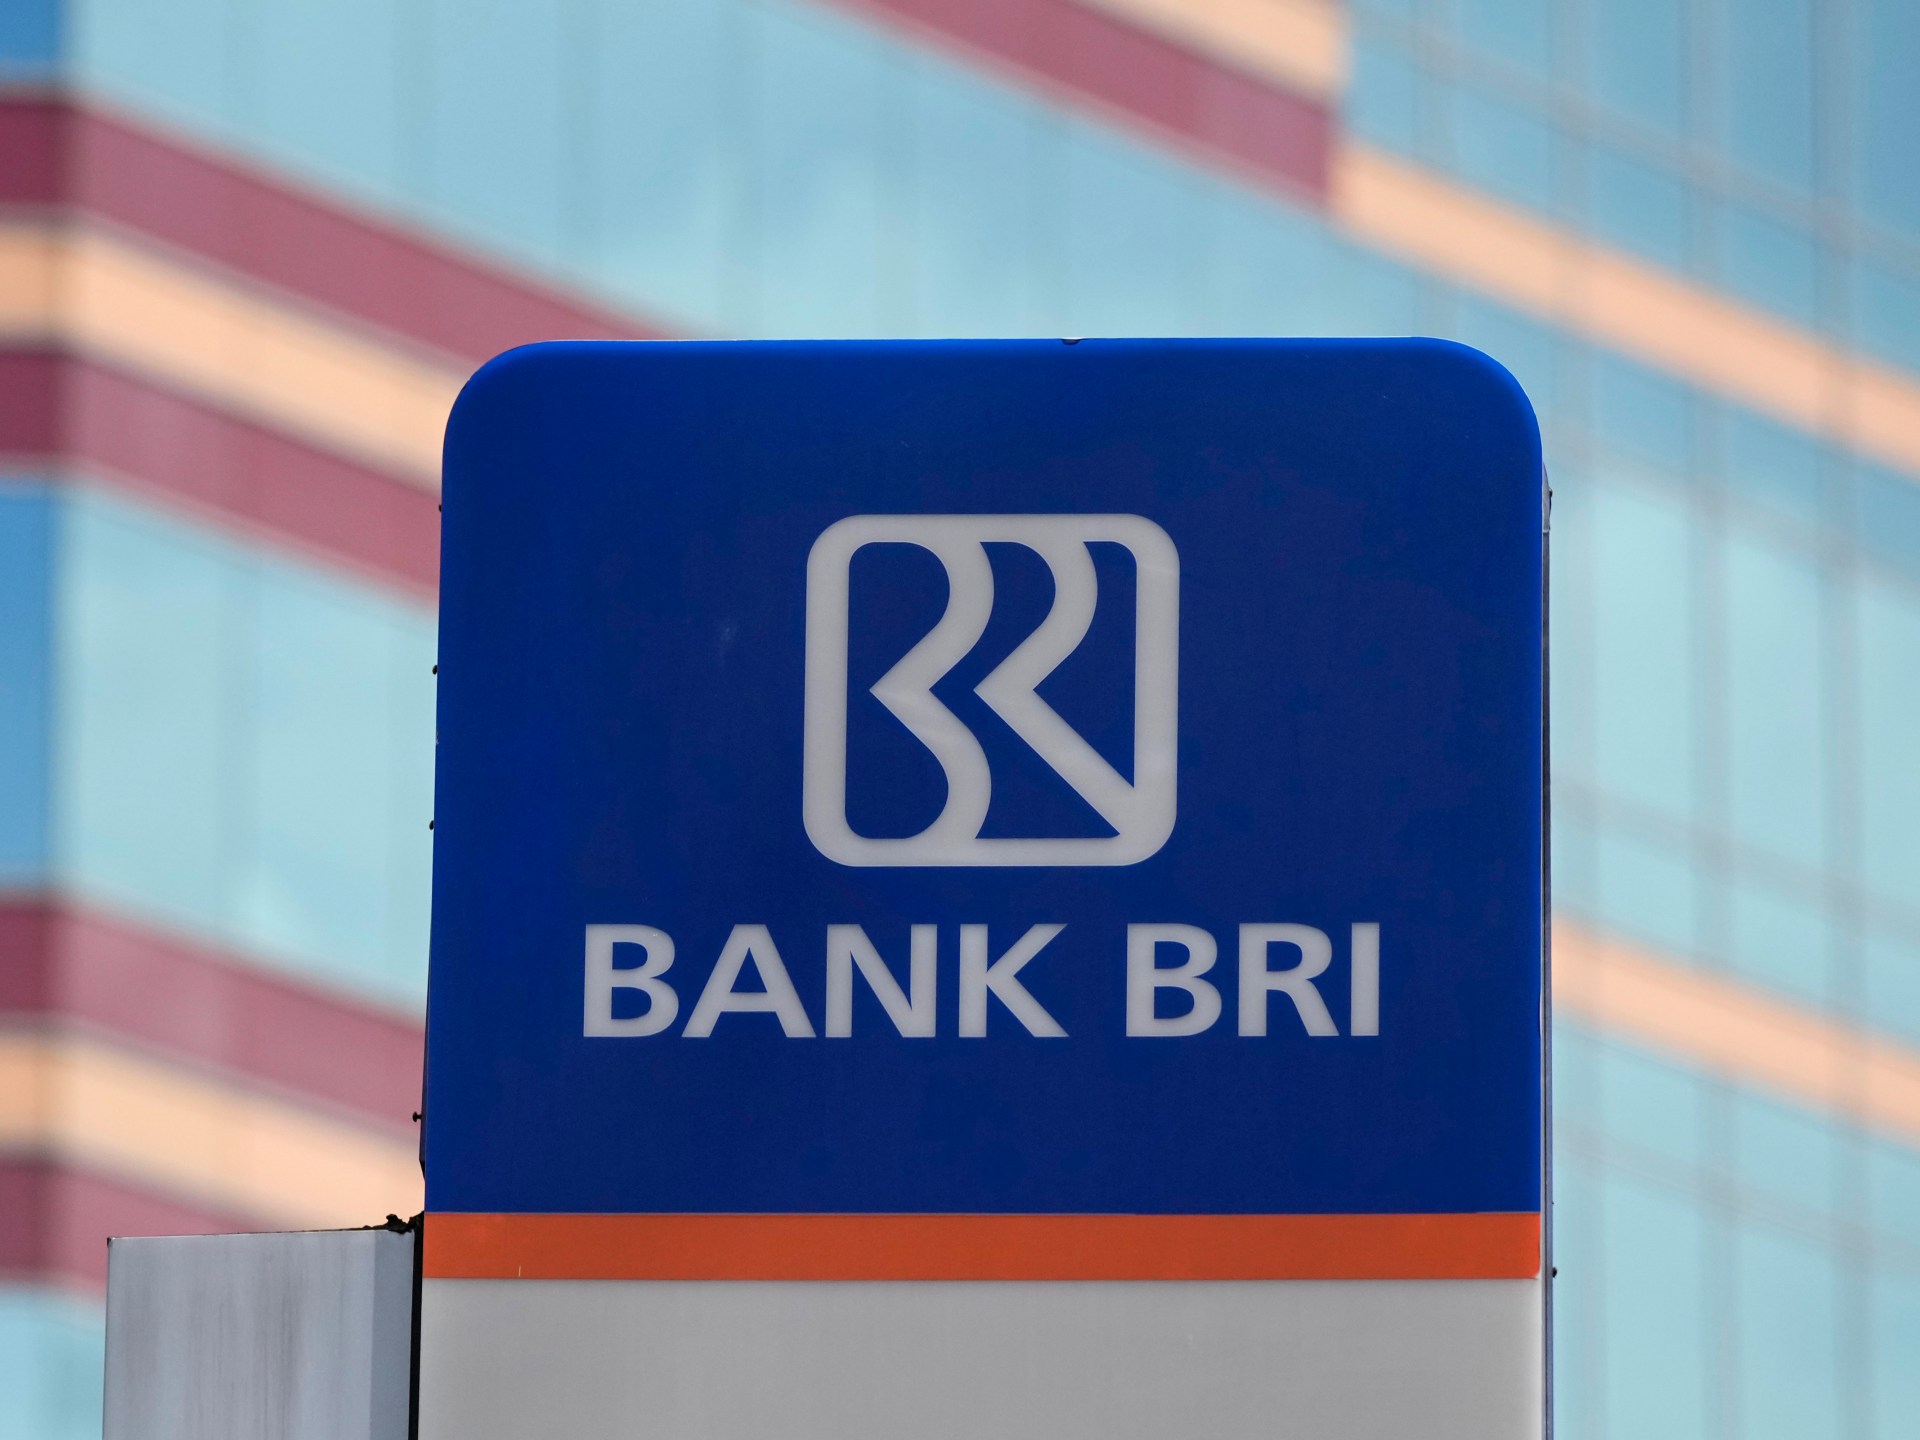 At Indonesia's biggest bank, customers' savings can vanish with a click, Business and Economy